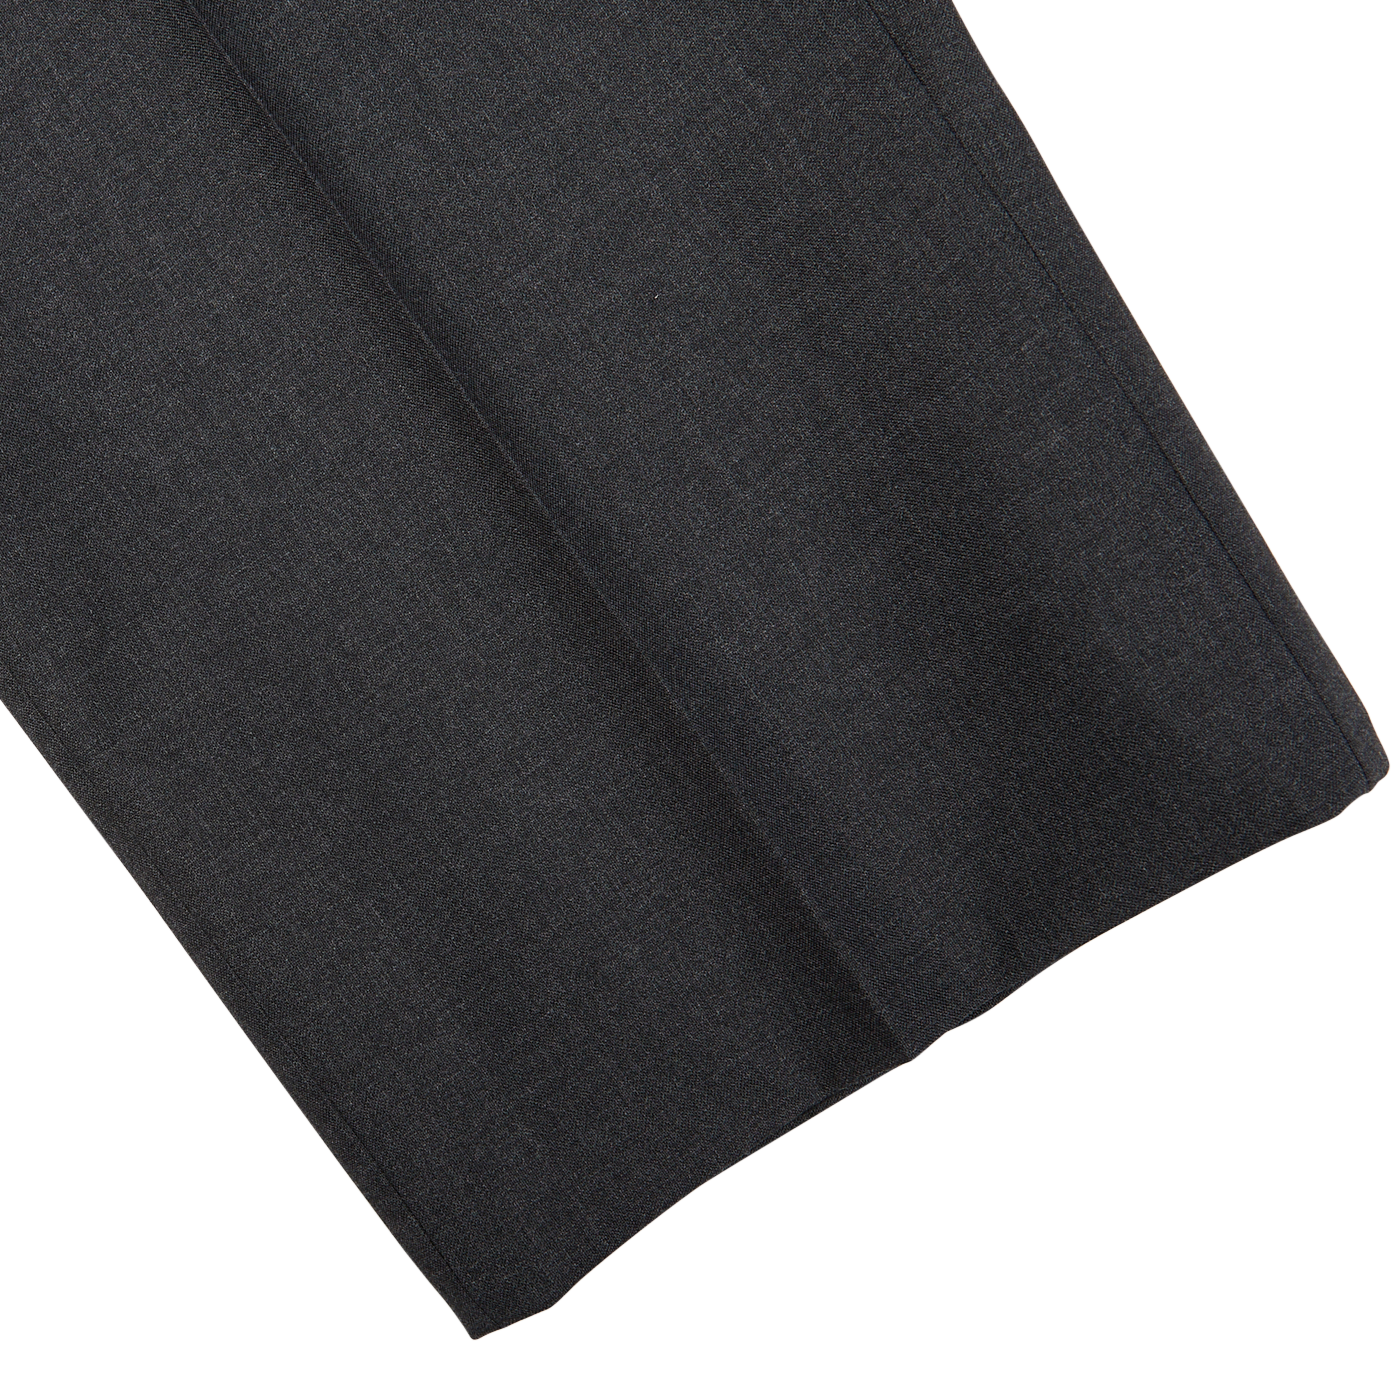 Dark grey Canali tropical wool flat front trousers draped on a white surface.